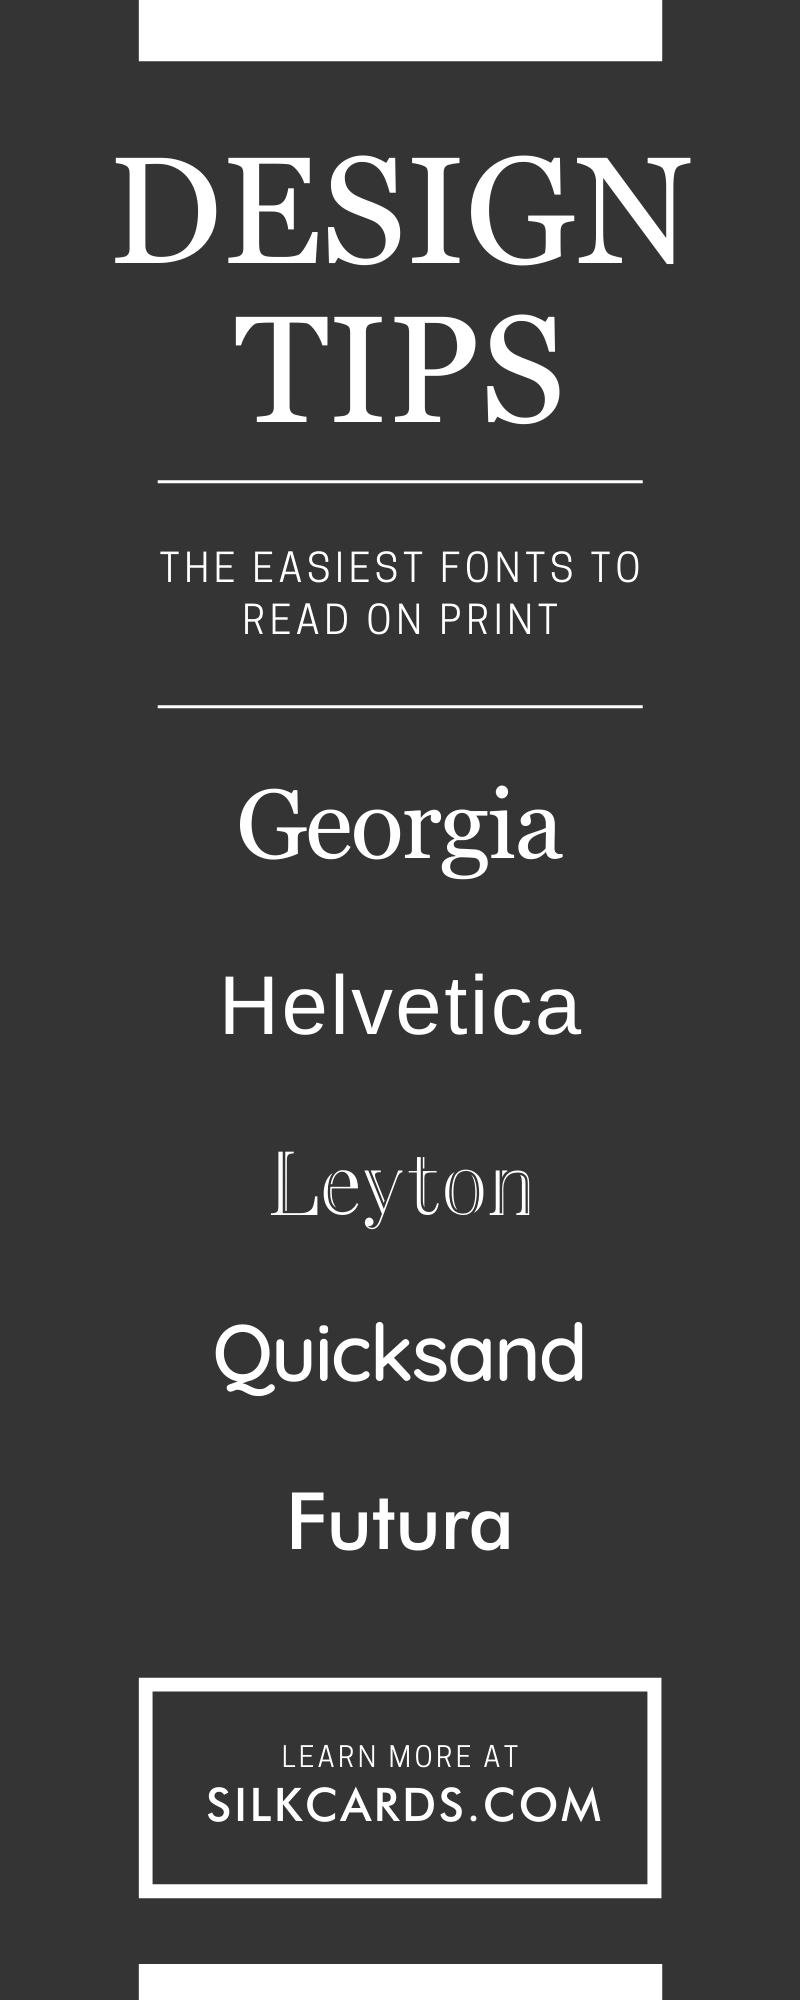 Design Tips: The Easiest Fonts To Read on Print